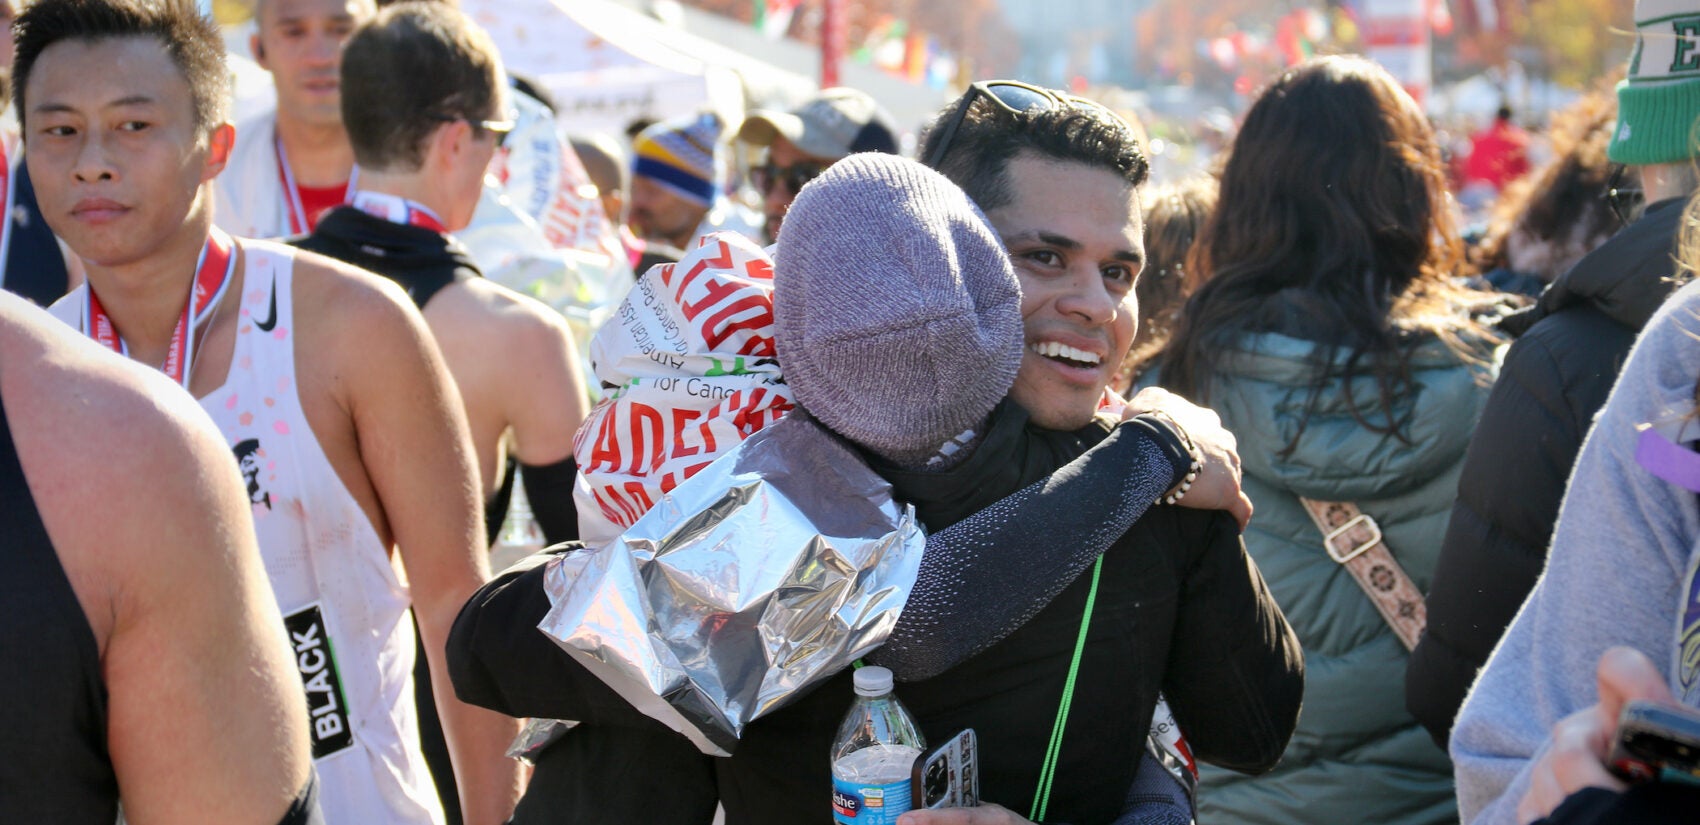 The 30th AACR Philadelphia Marathon saw thousands of people pack the Benjamin Franklin Parkway on Sunday, Nov. 19, 2023 to pursue the 26.2 mile journey in front of them. (Cory Sharber/WHYY)